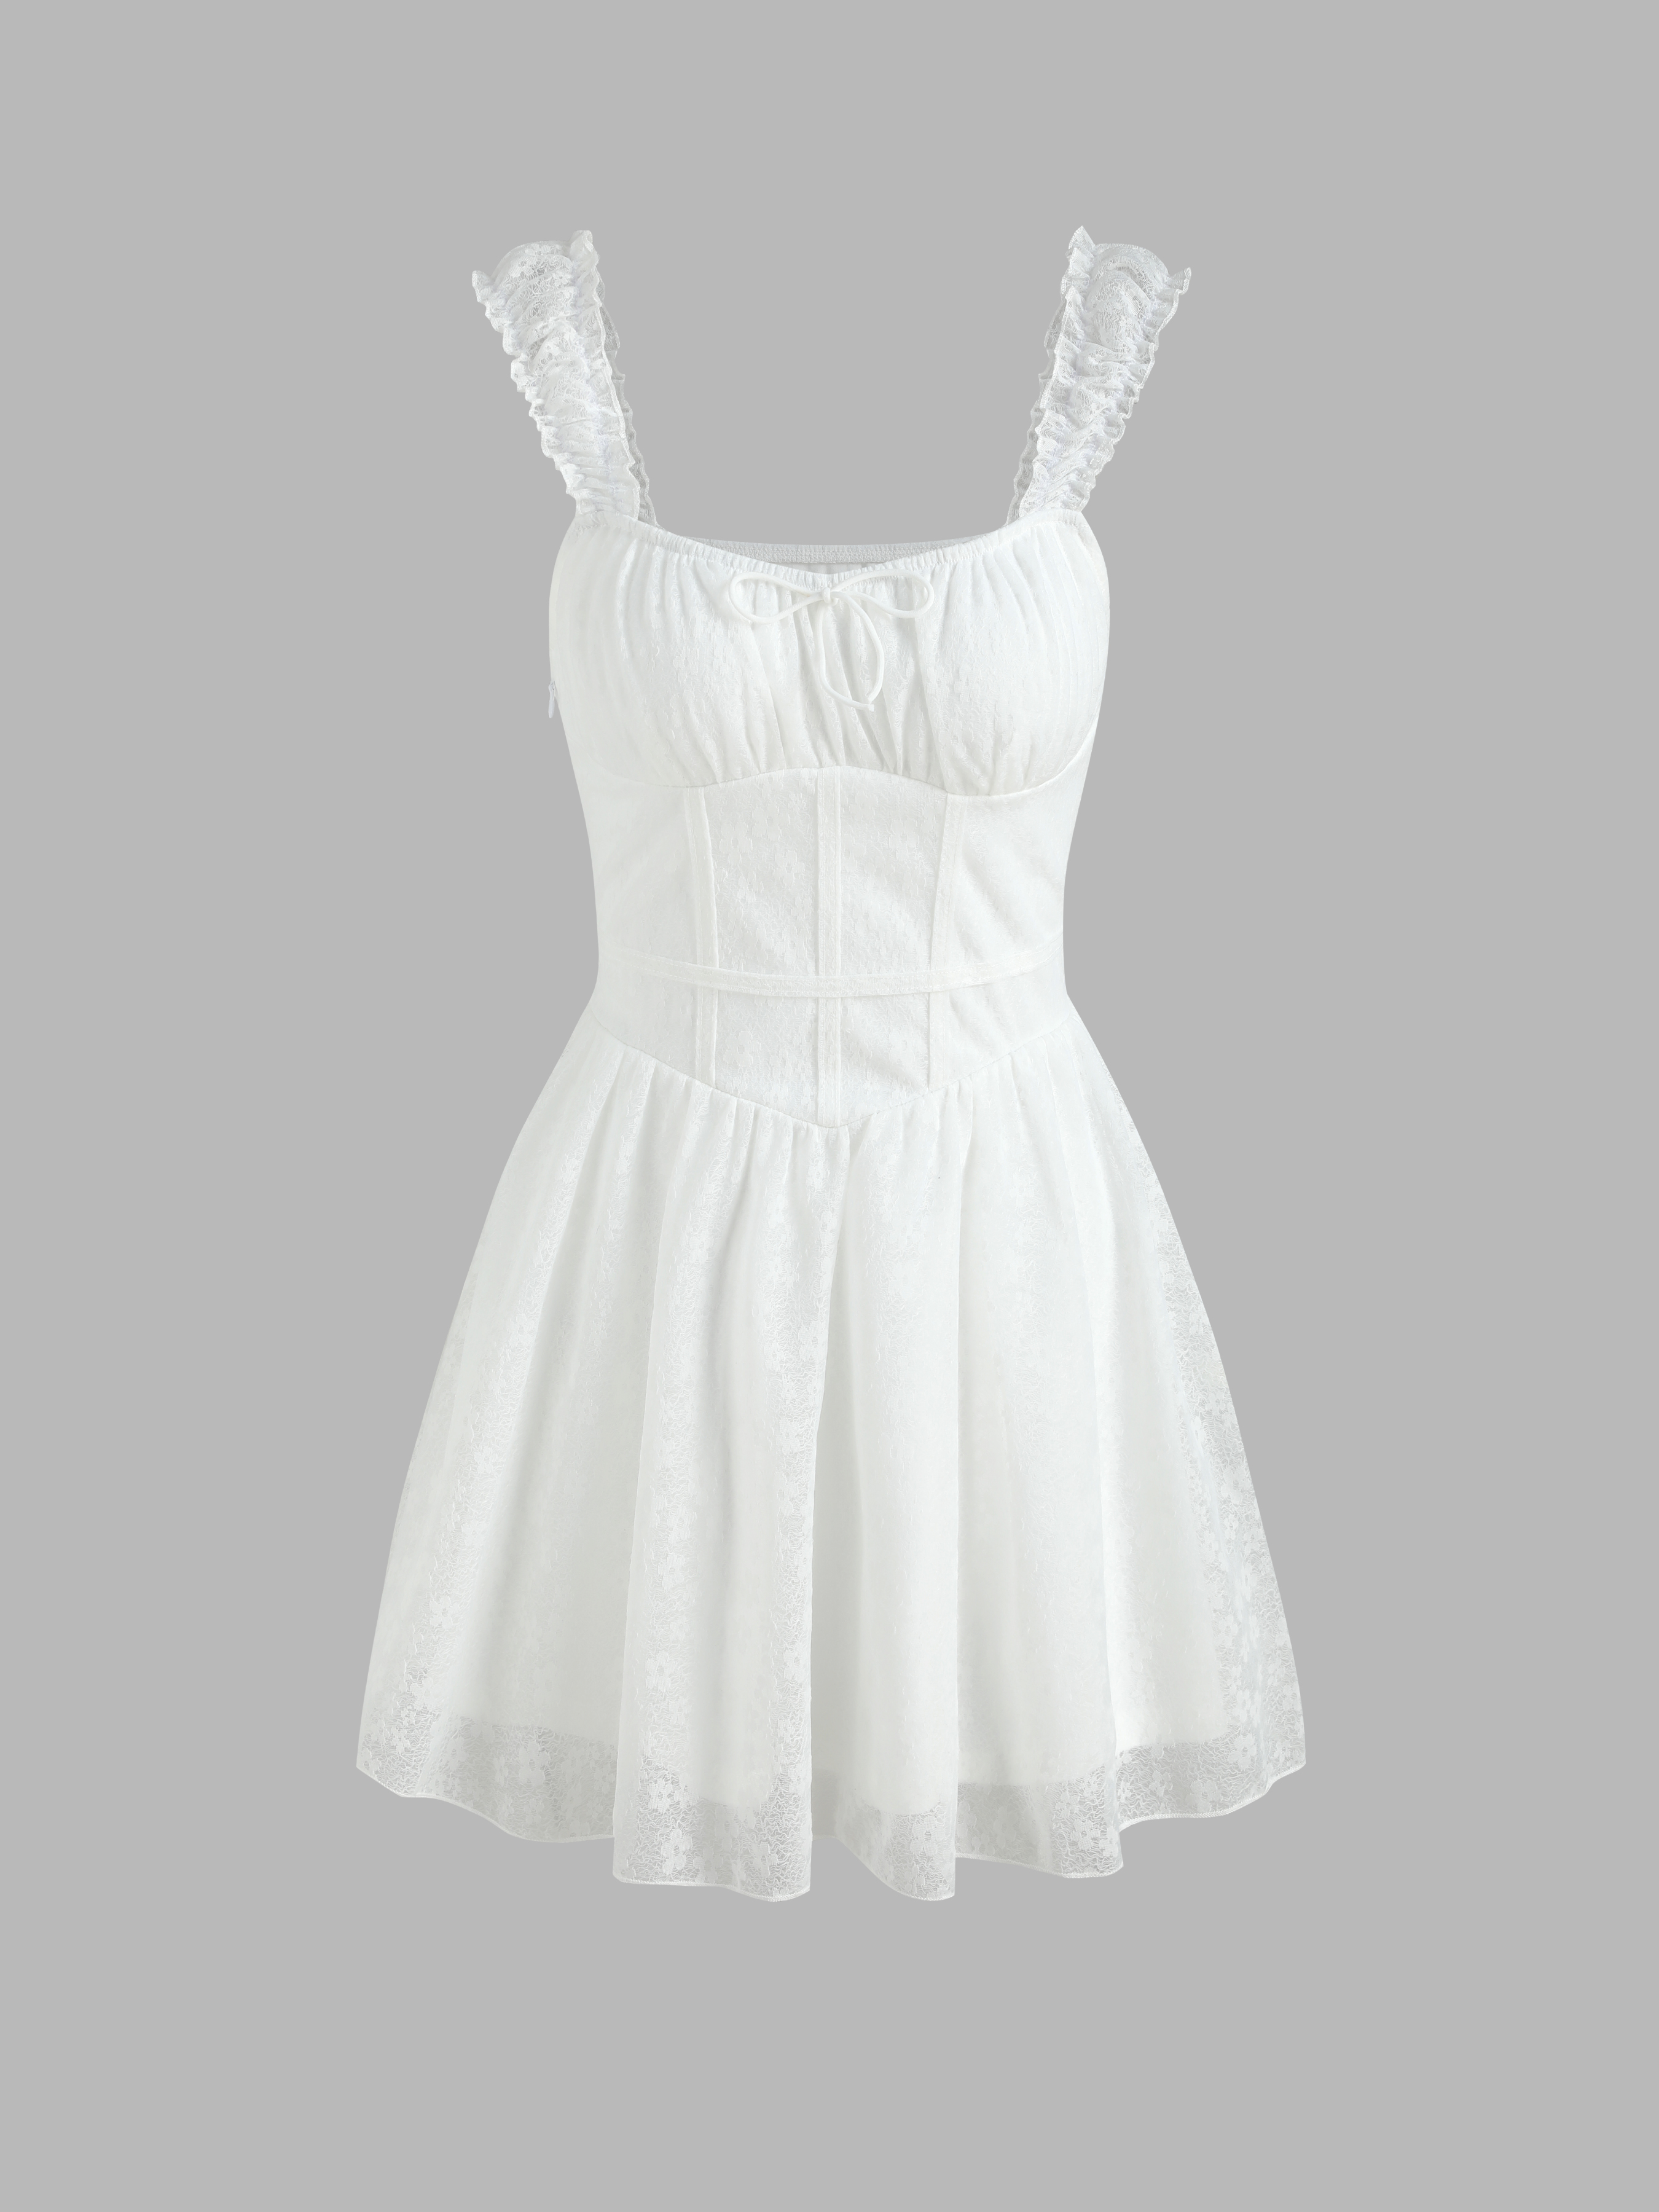 Solid Floral Lace Knotted Mini Dress - Cider